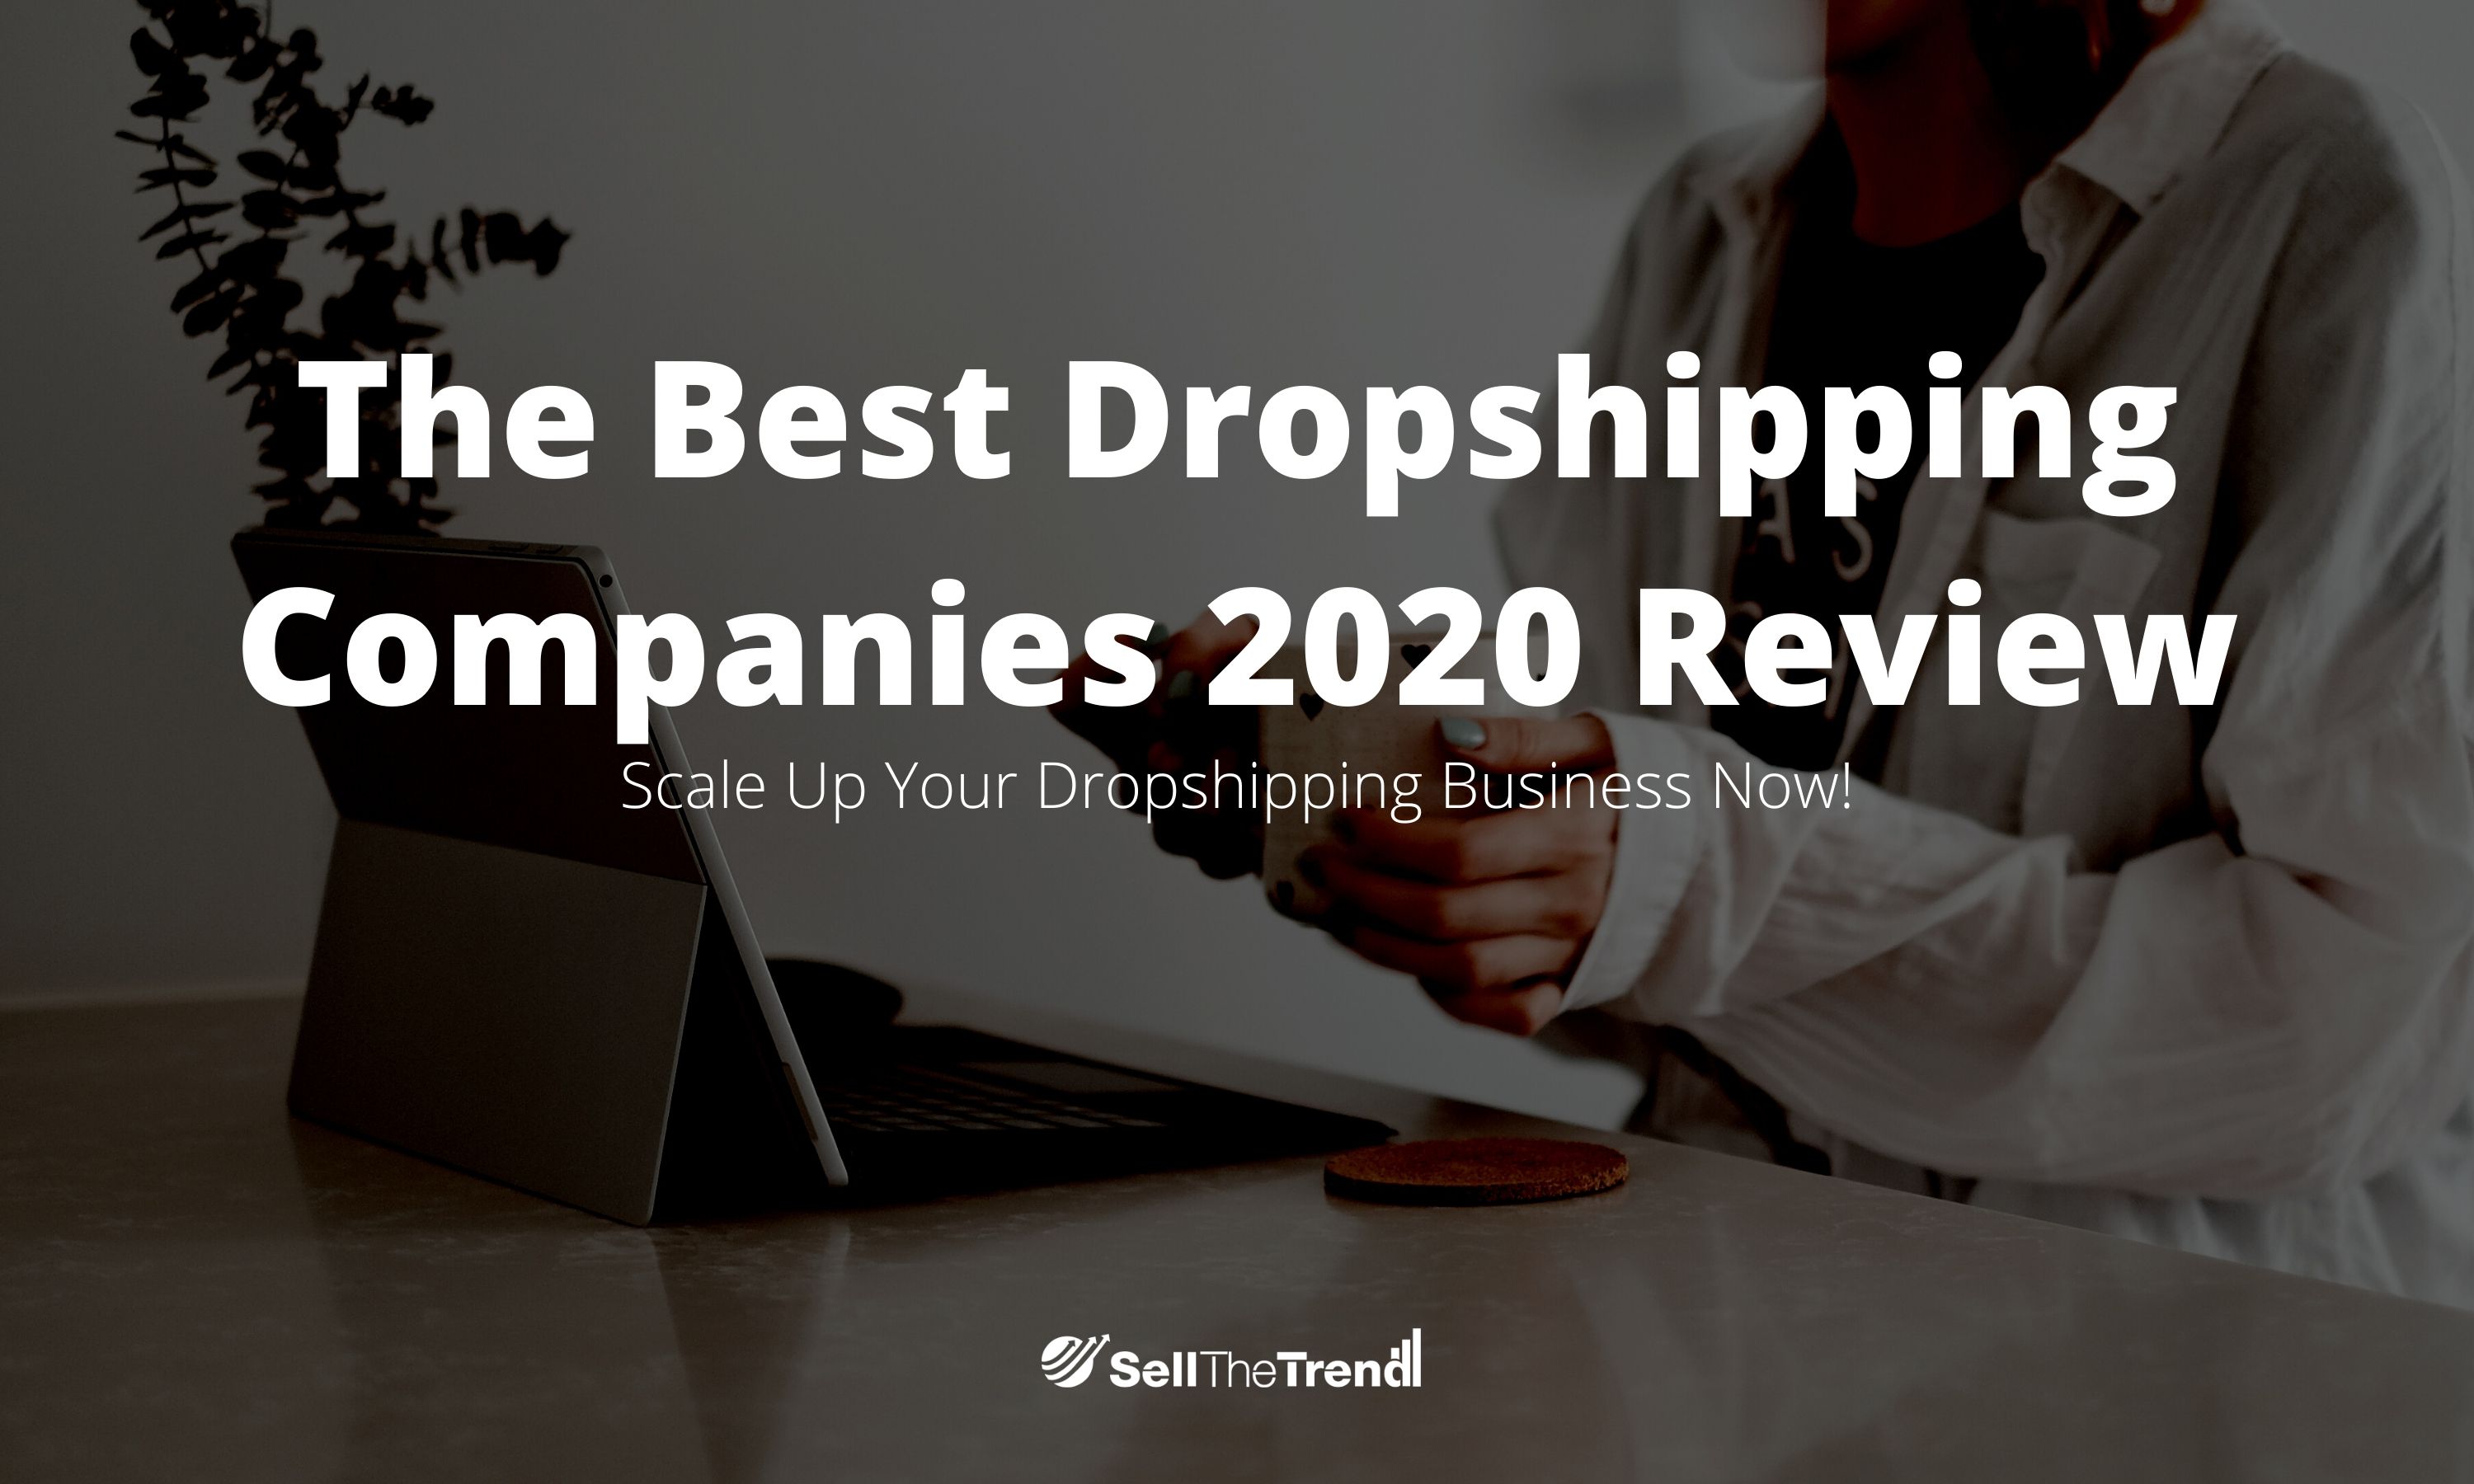 The Best Dropshipping Companies 2020 Review